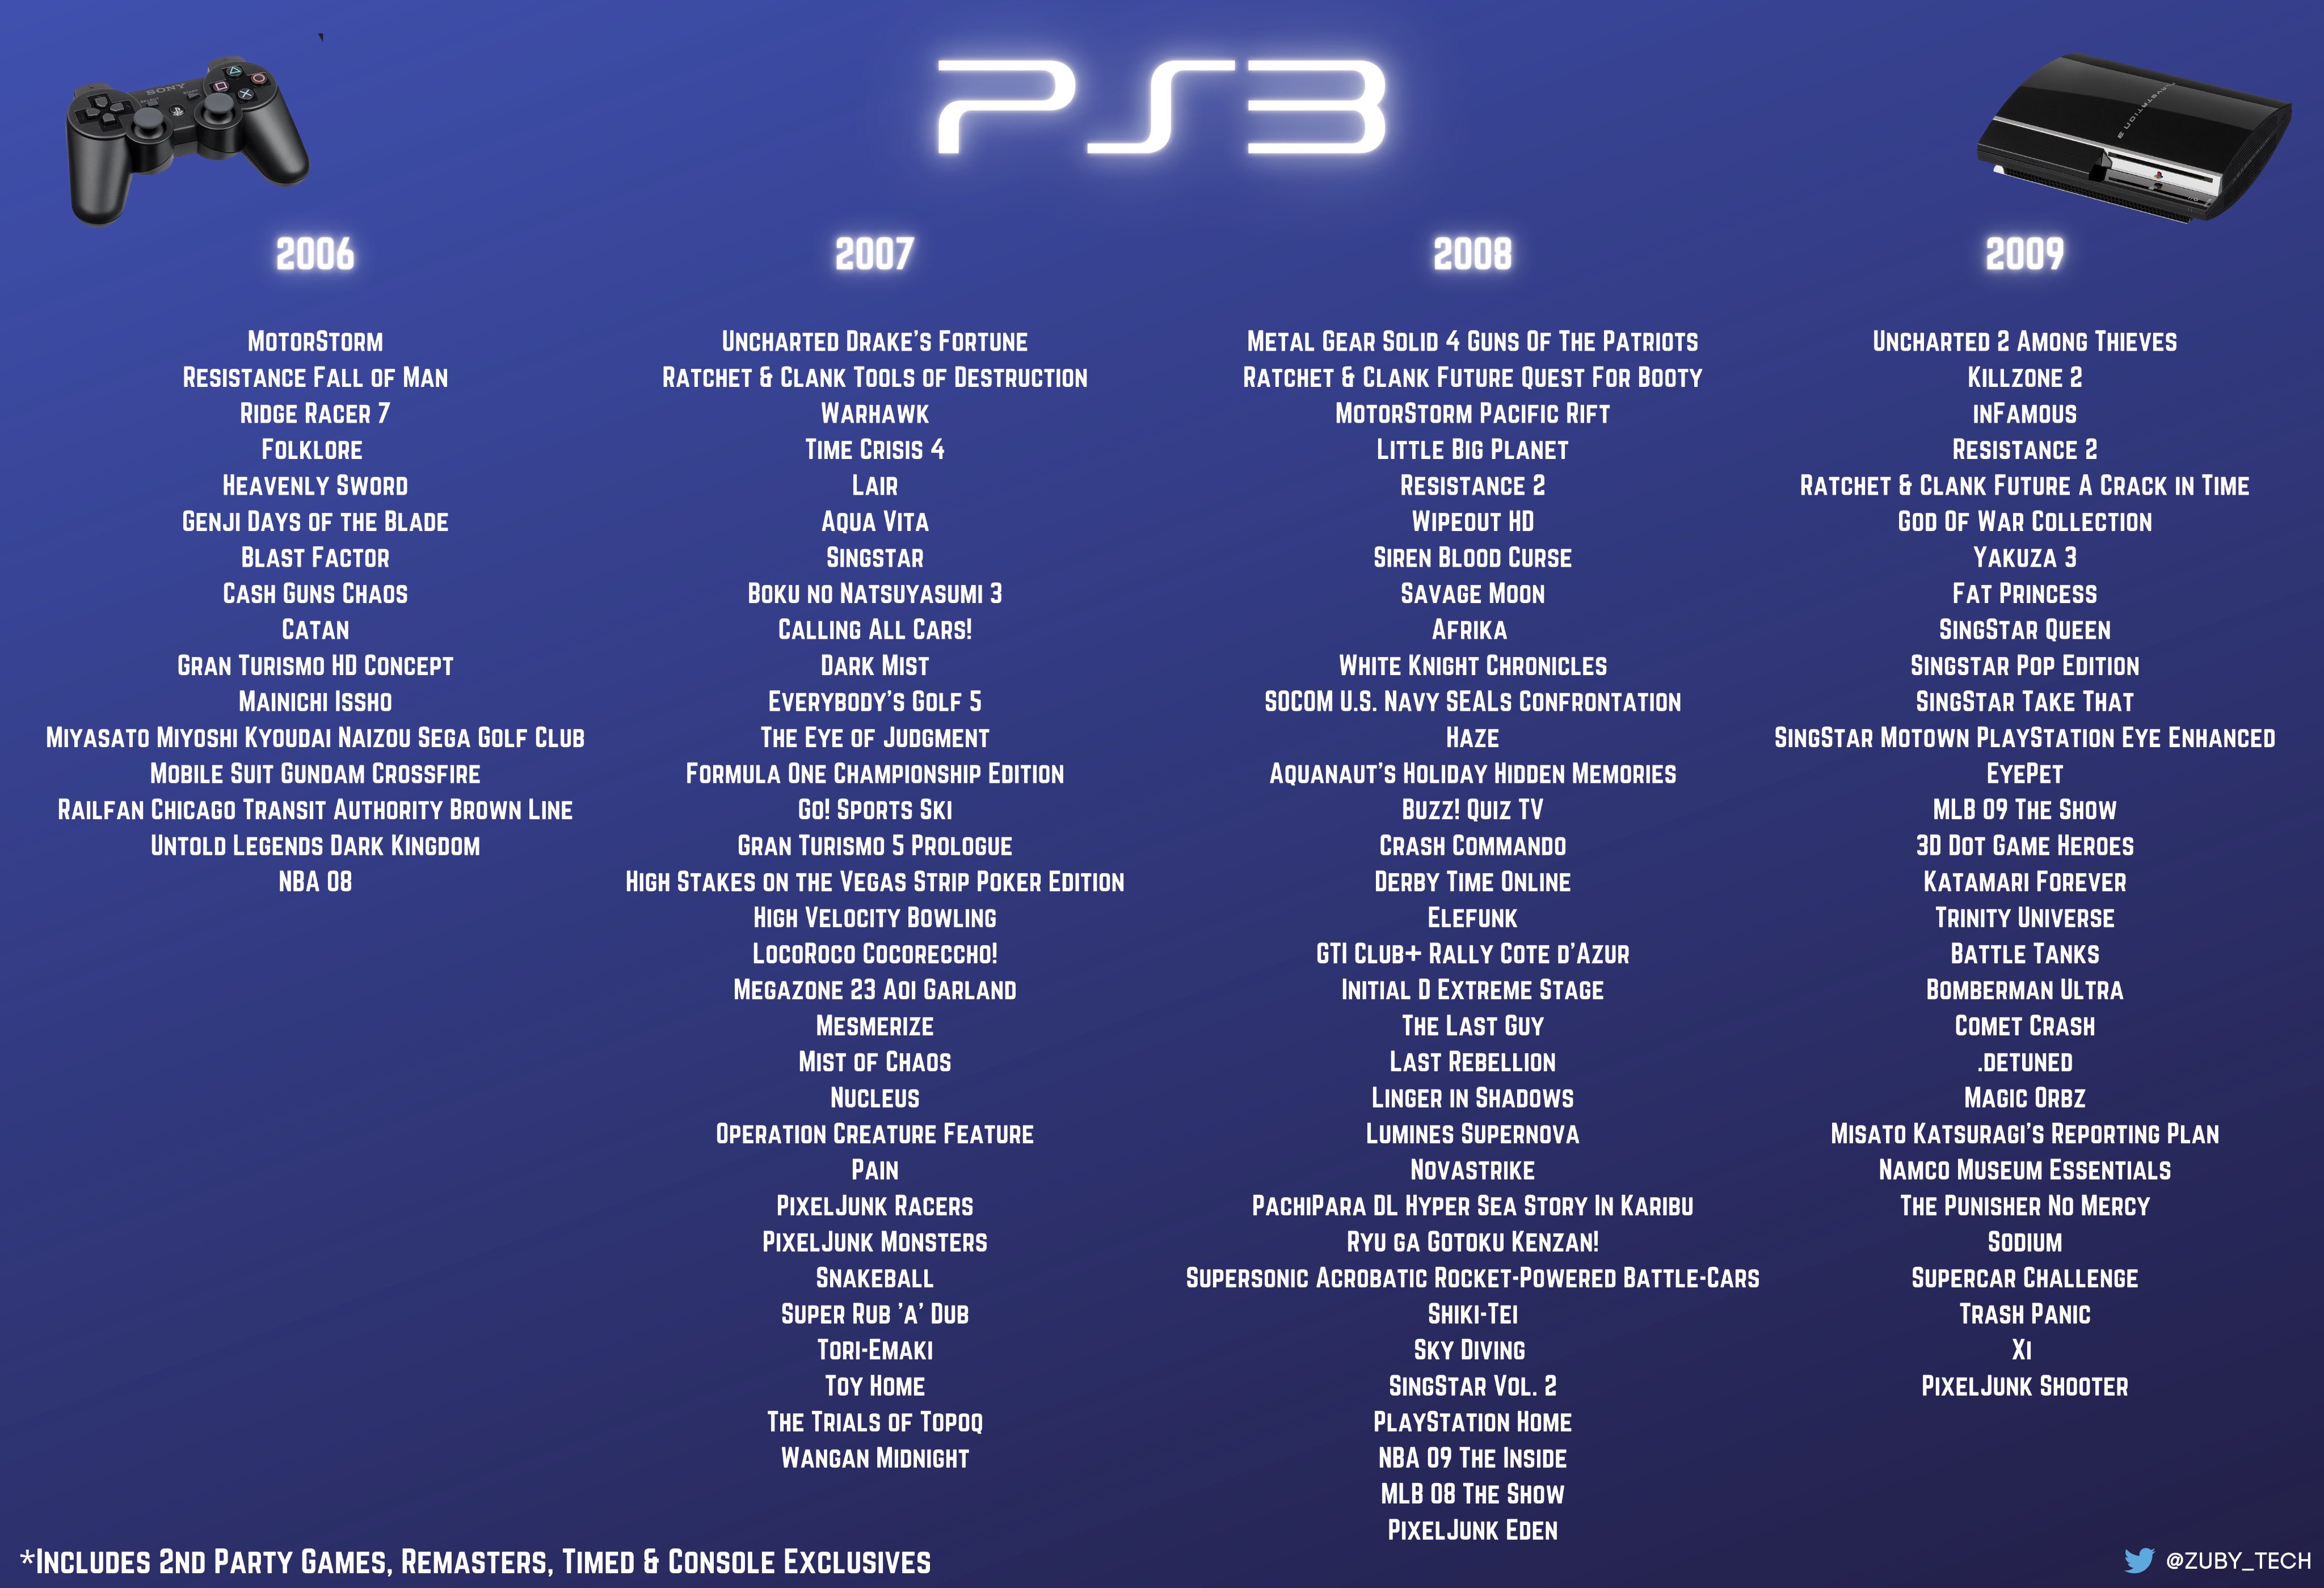 Misverstand cafetaria consumptie Zuby_Tech on Twitter: "Every PlayStation Exclusive From 2006 From PlayStation  3 Gen and From PlayStation 4 Gen: #PS3 #PlayStation3 #PlayStation  #PlayBeyond #PlayB3yond #PS4 #4ThePlayers #GreatnessAwaits #PS4  #PlayStation4 https://t.co/kQ4eGAx2Rc" / Twitter